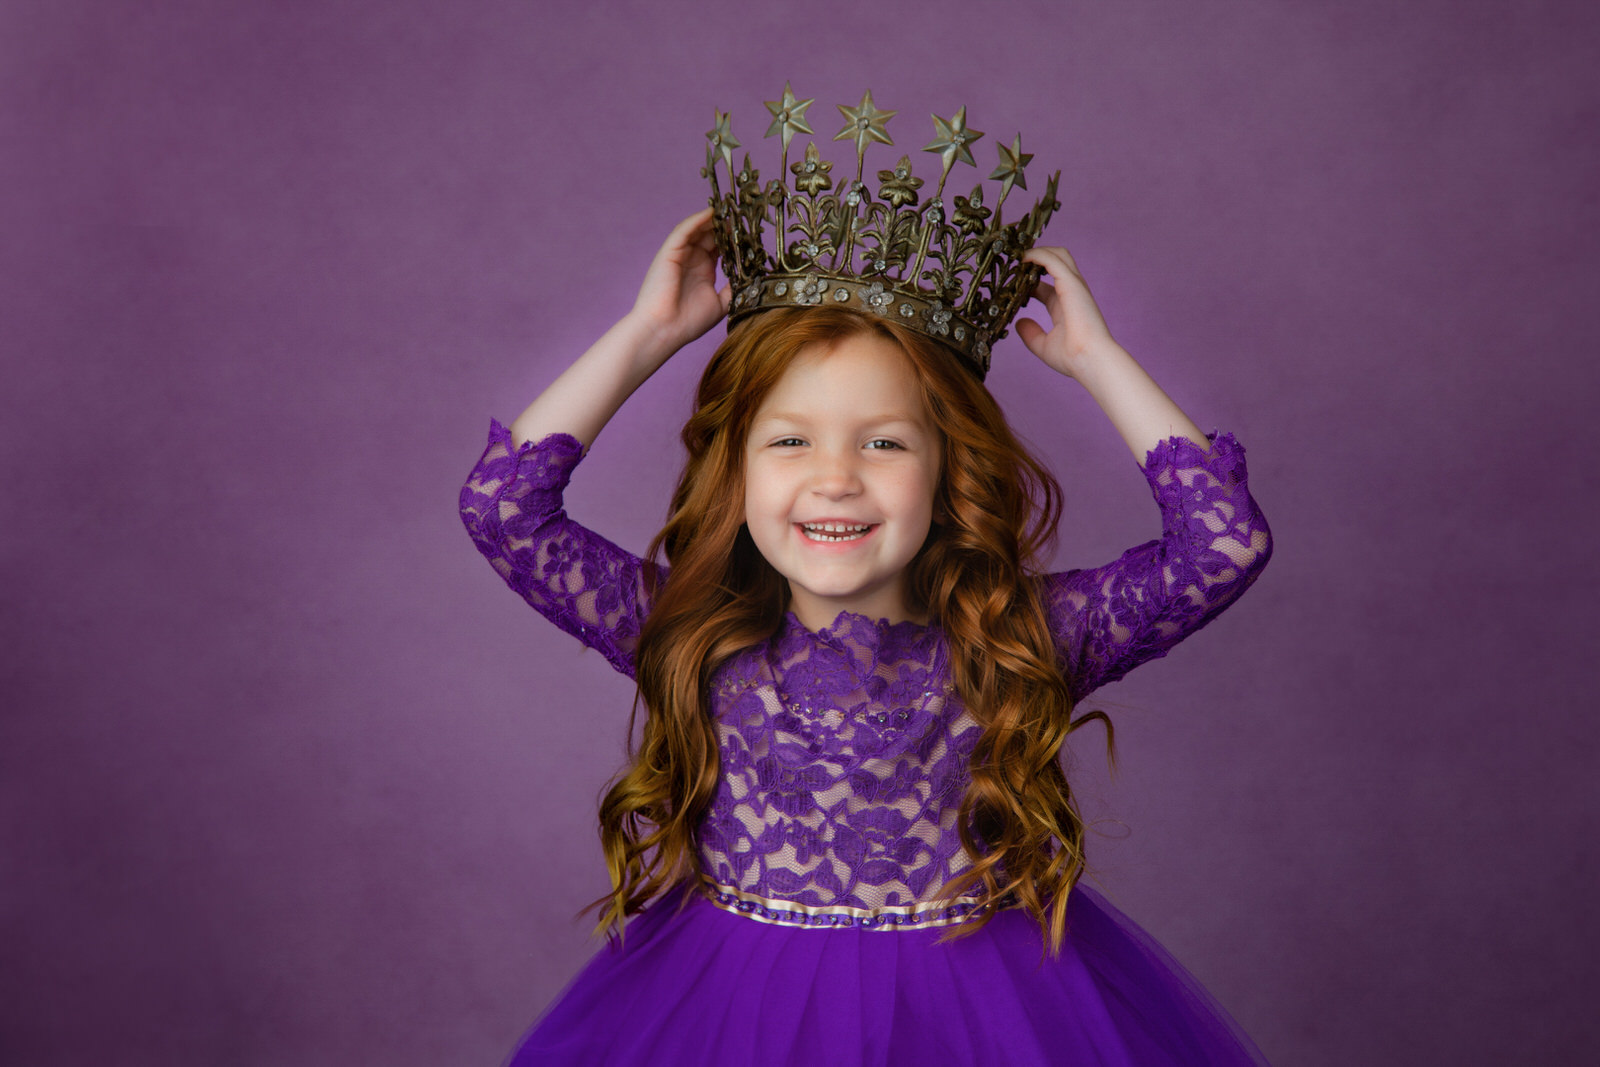 A young girl in a purple dress holds a large crown above her head in a studio DFW Kids